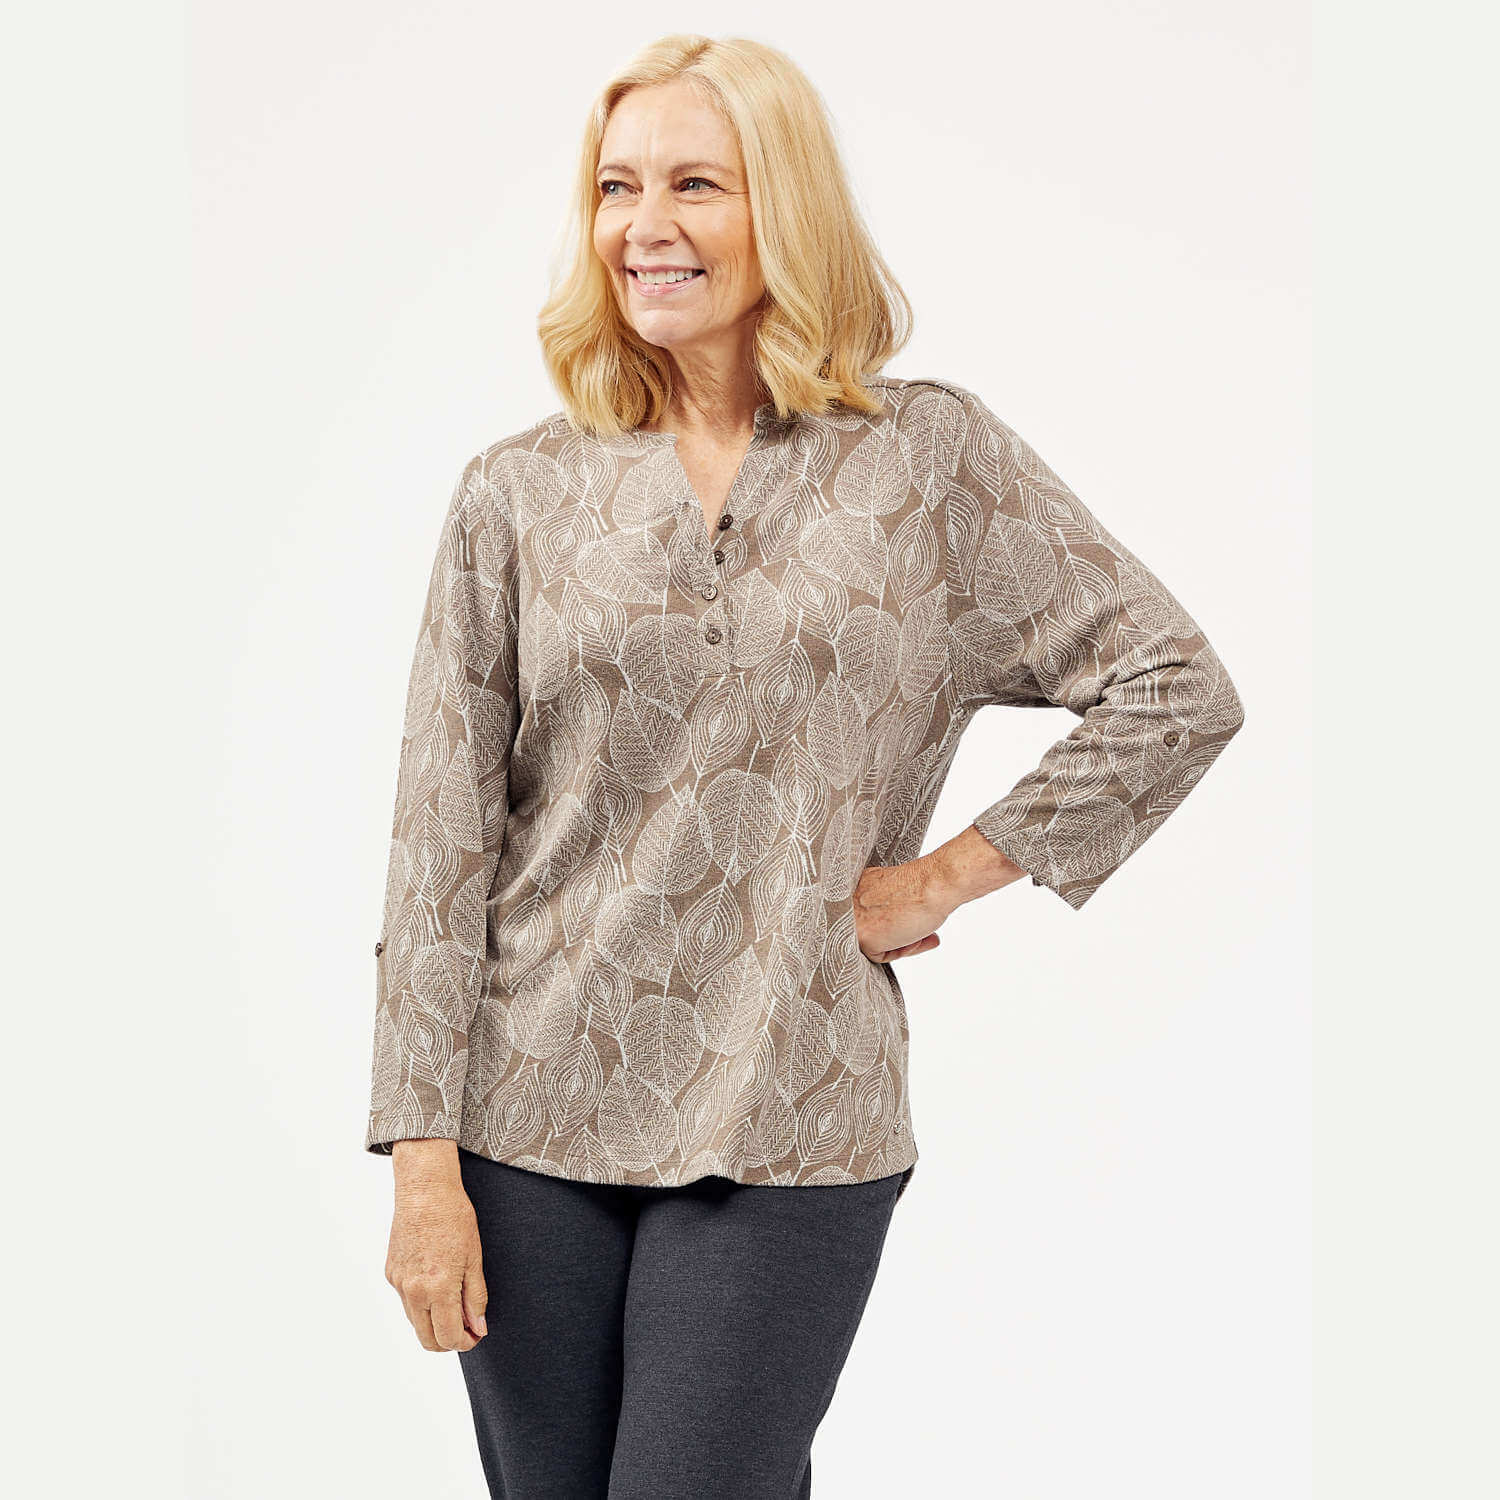 Tigiwear Stencil Leaf Print Top - Taupe 1 Shaws Department Stores